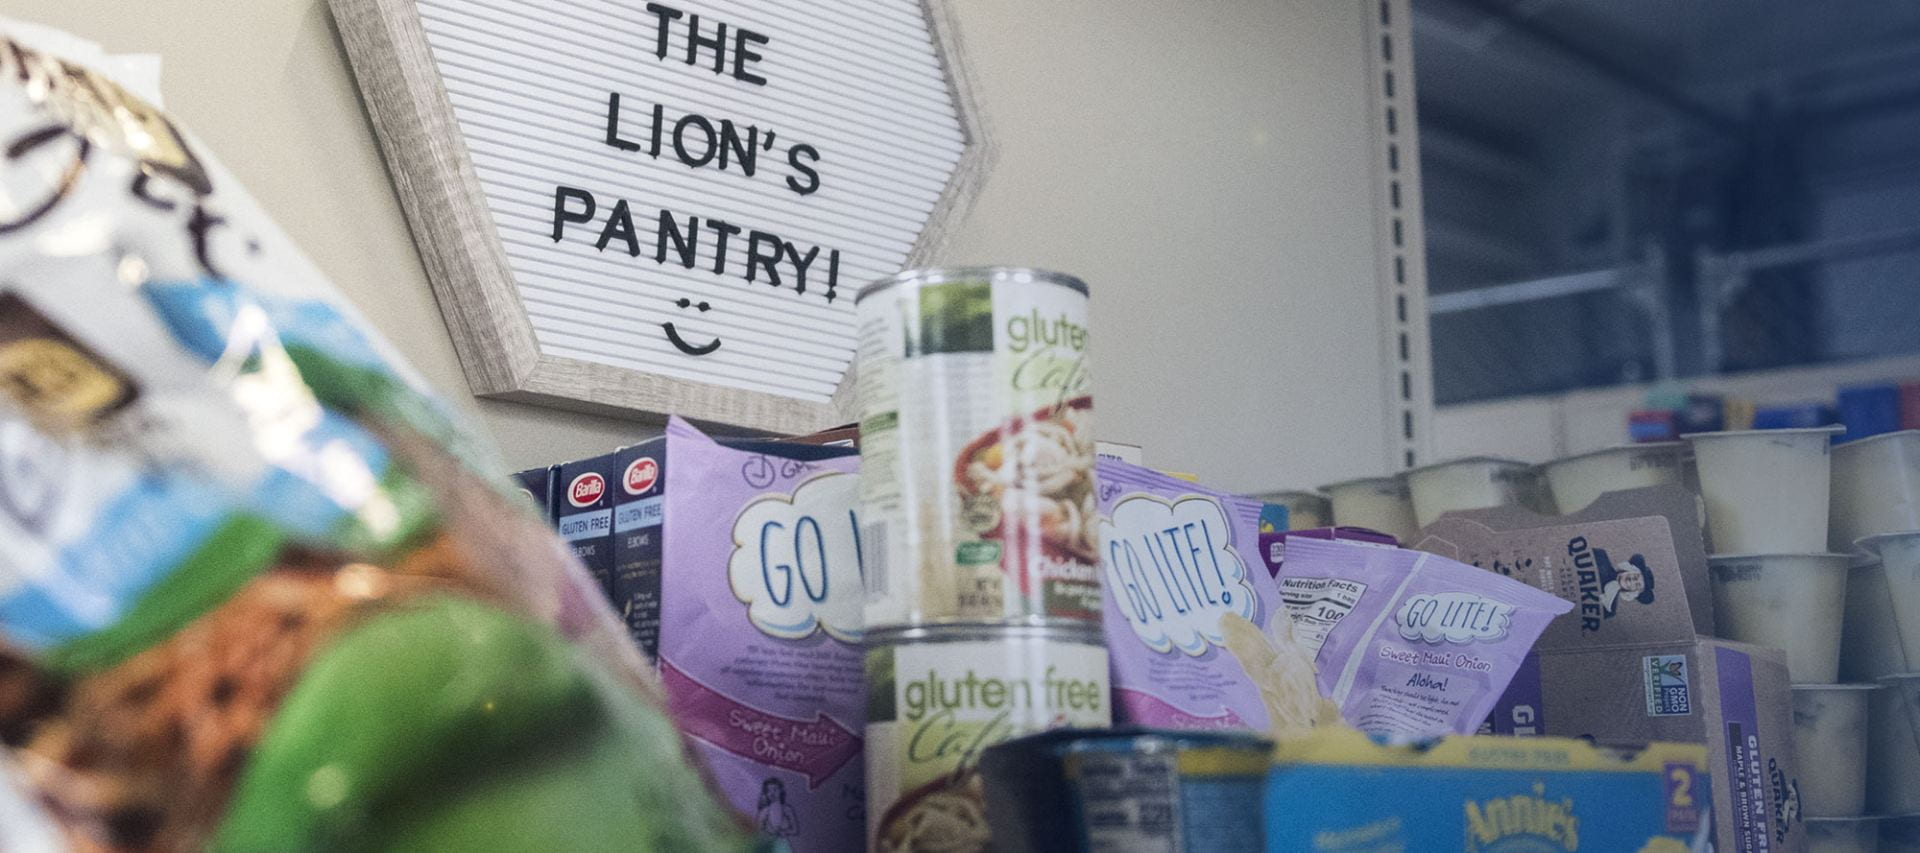 Food on shelves of Lion’s Pantry.